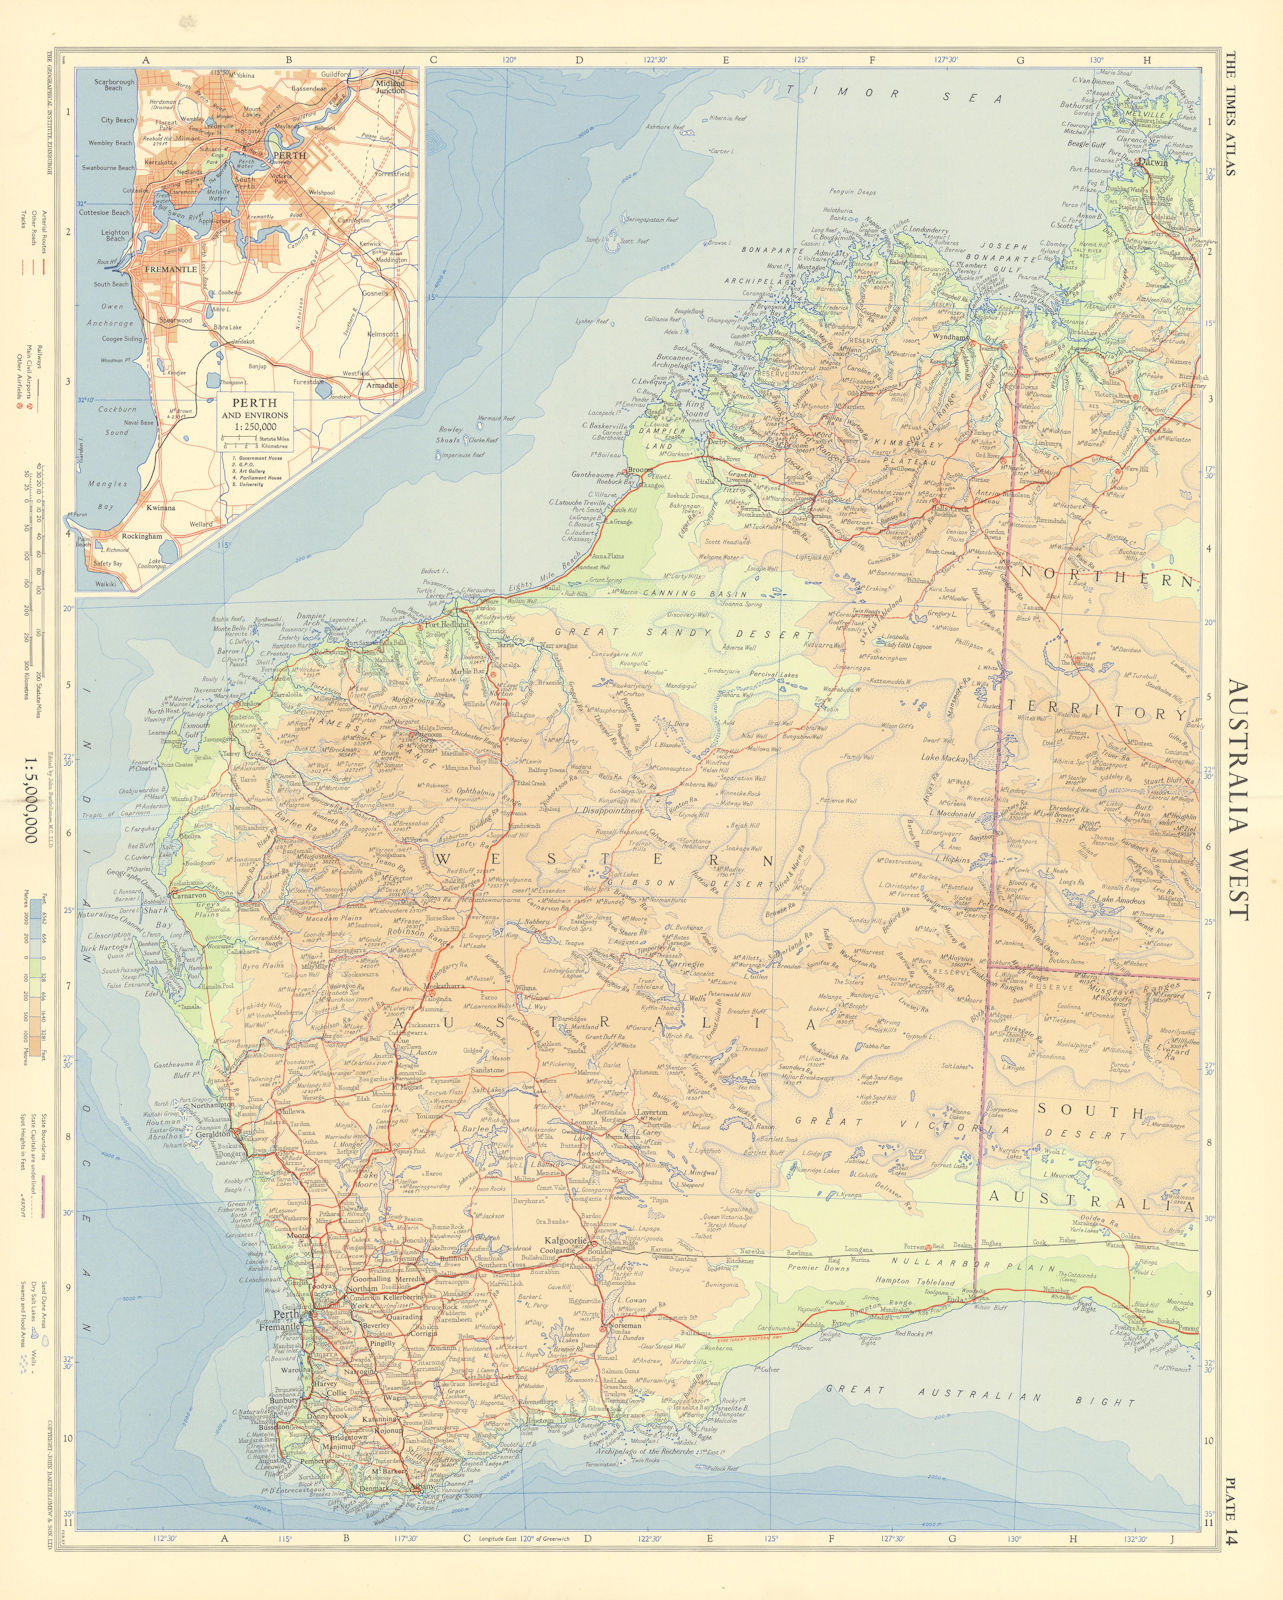 Associate Product Western Australia. Perth & environs. TIMES 1958 old vintage map plan chart